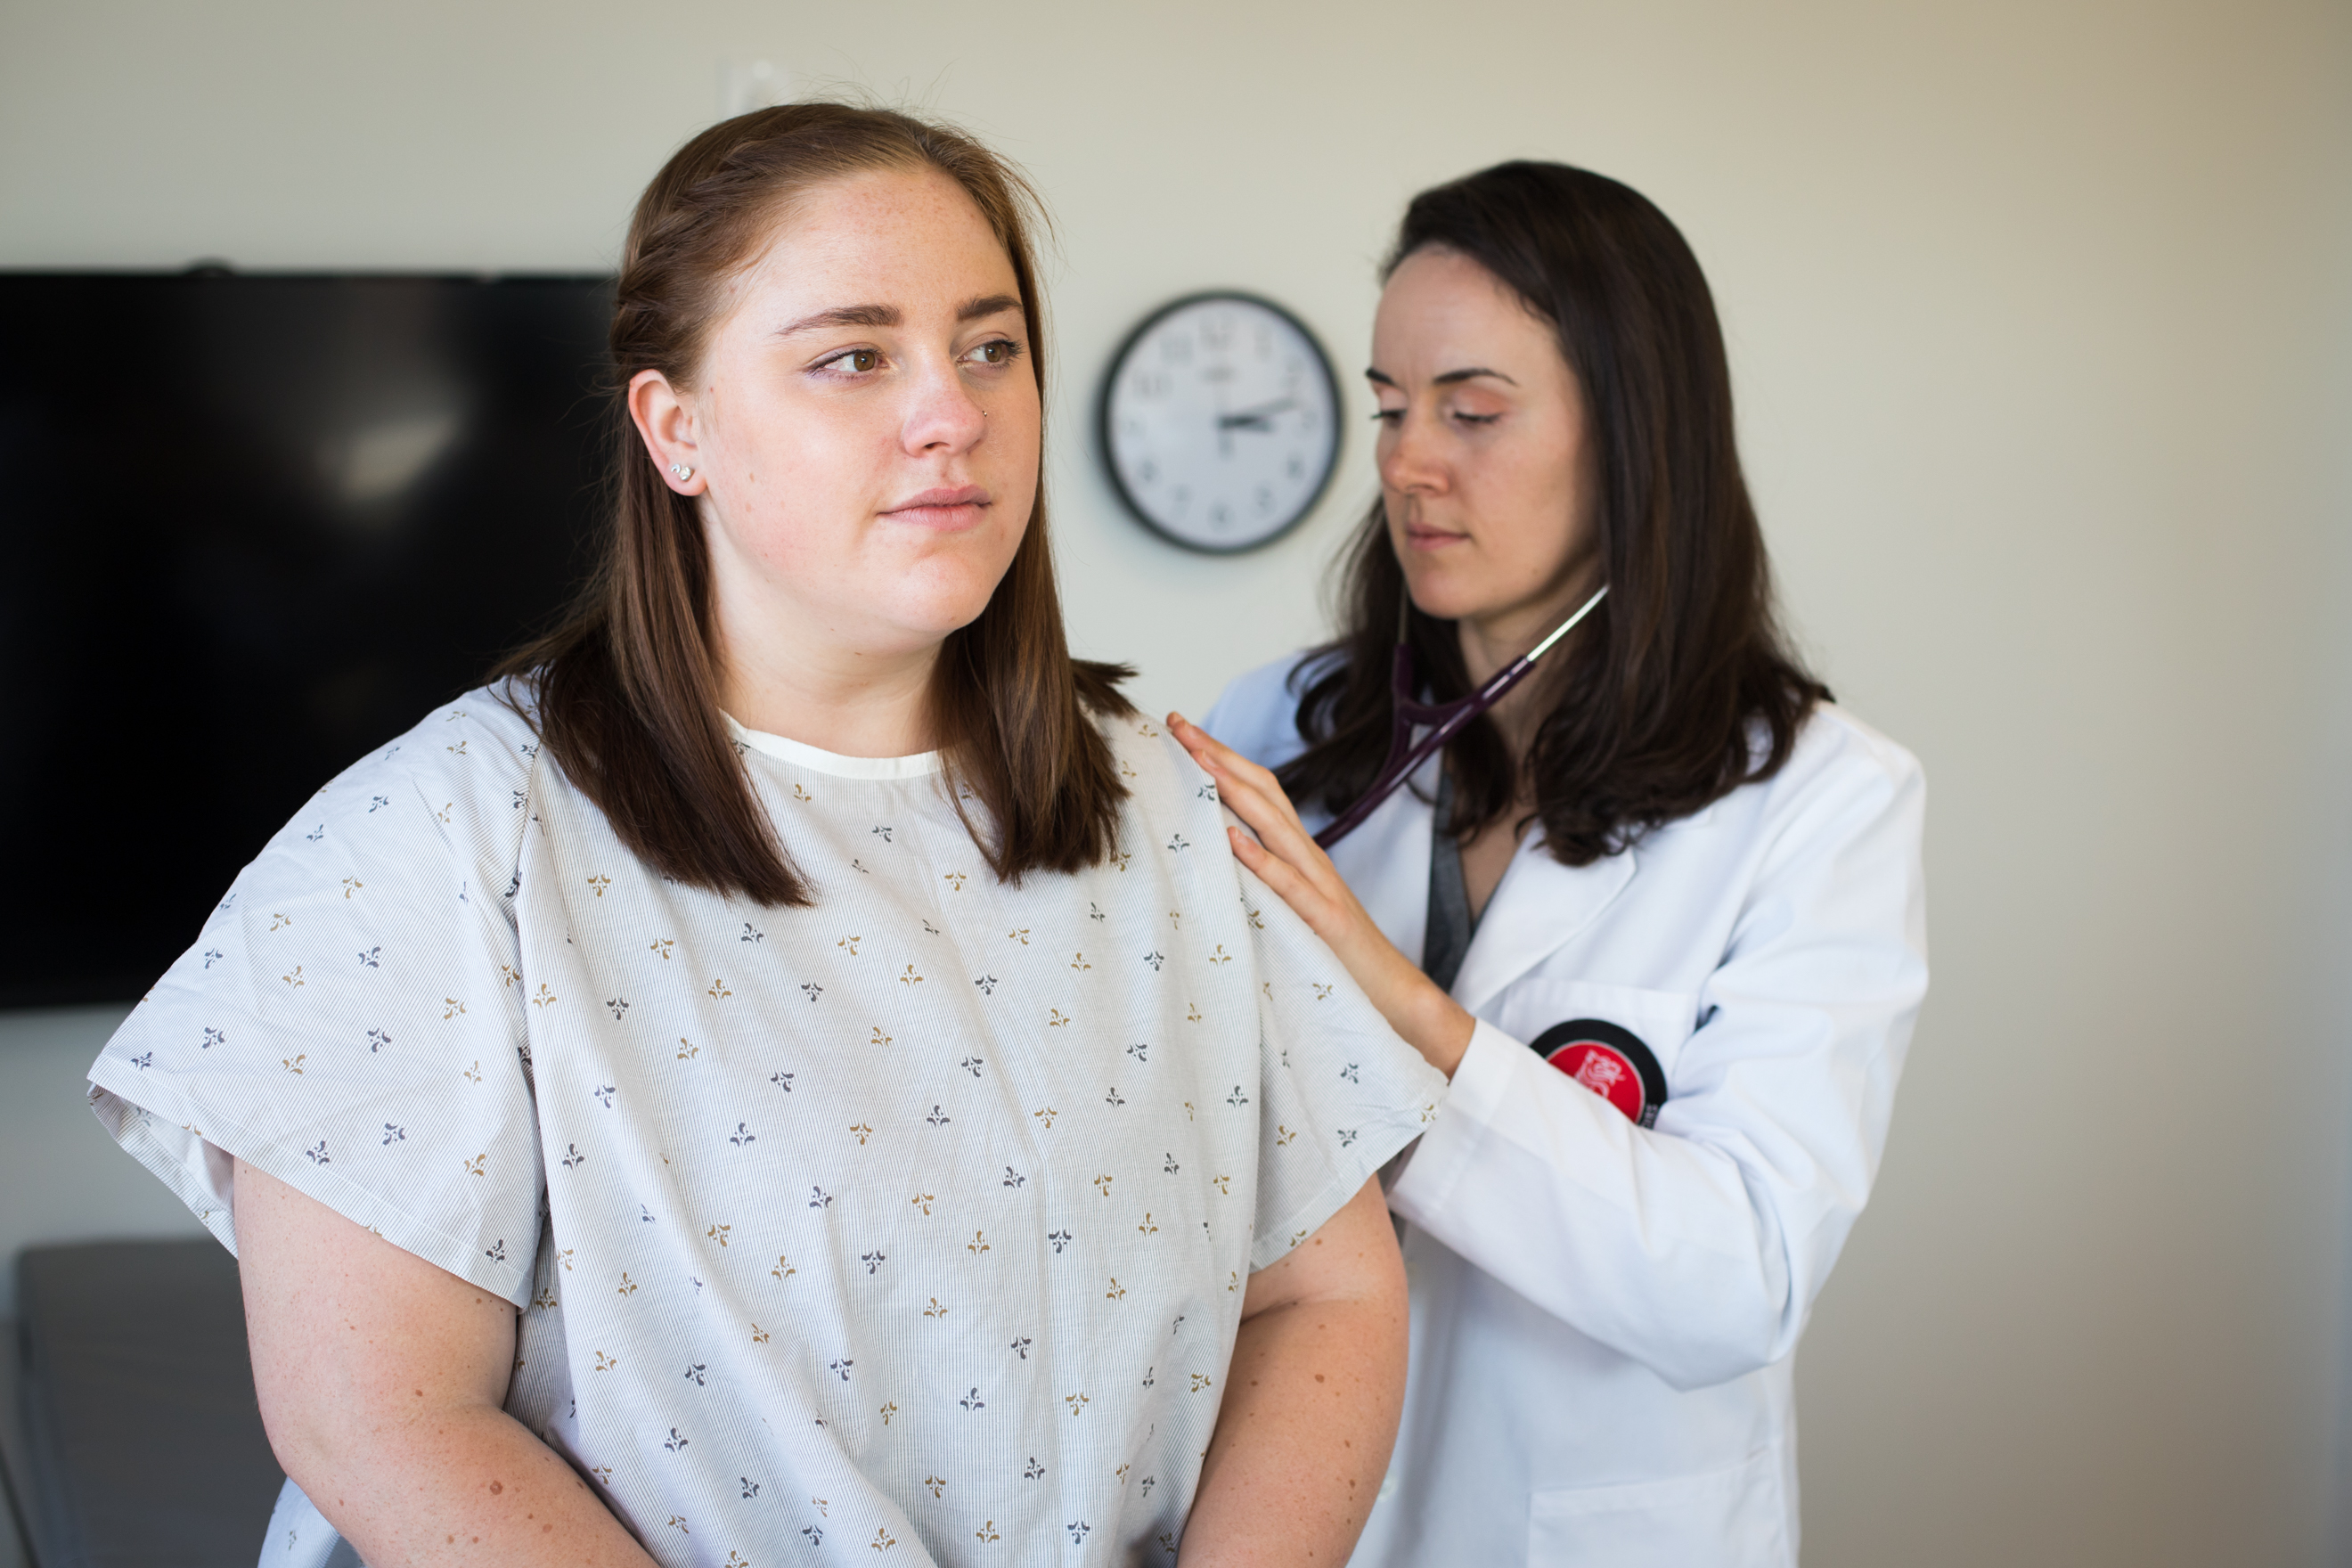 A physician assistant studies student listens to a patient's lungs using a stethoscope.